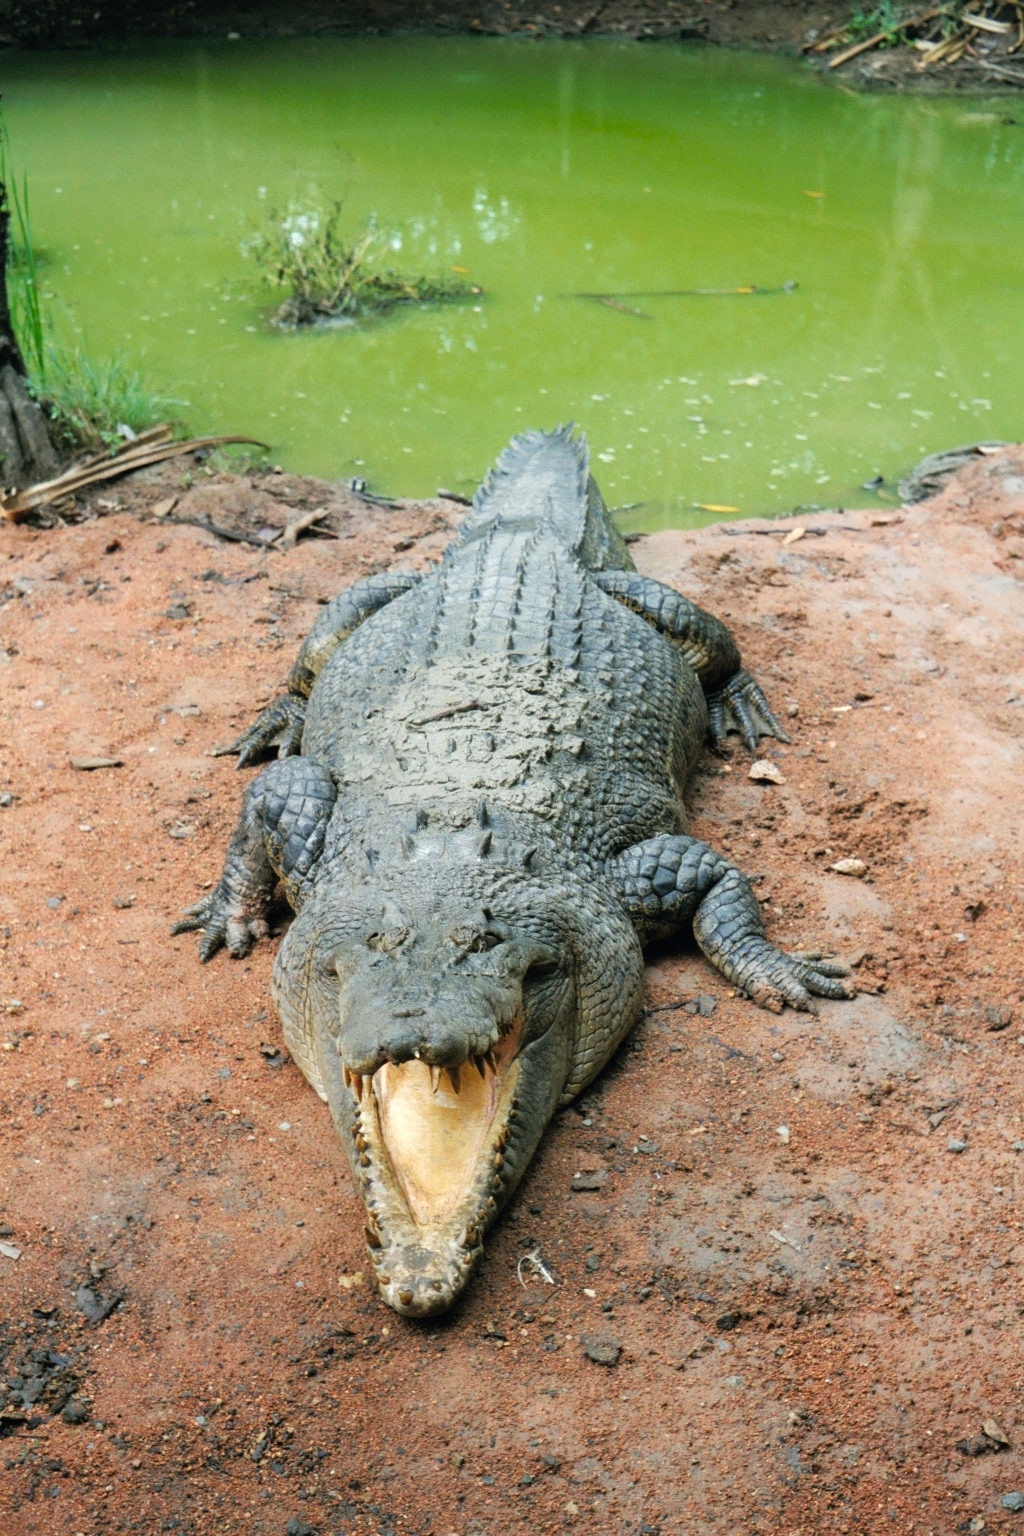 Large crocodile, very close, no fence, mouth wide open.